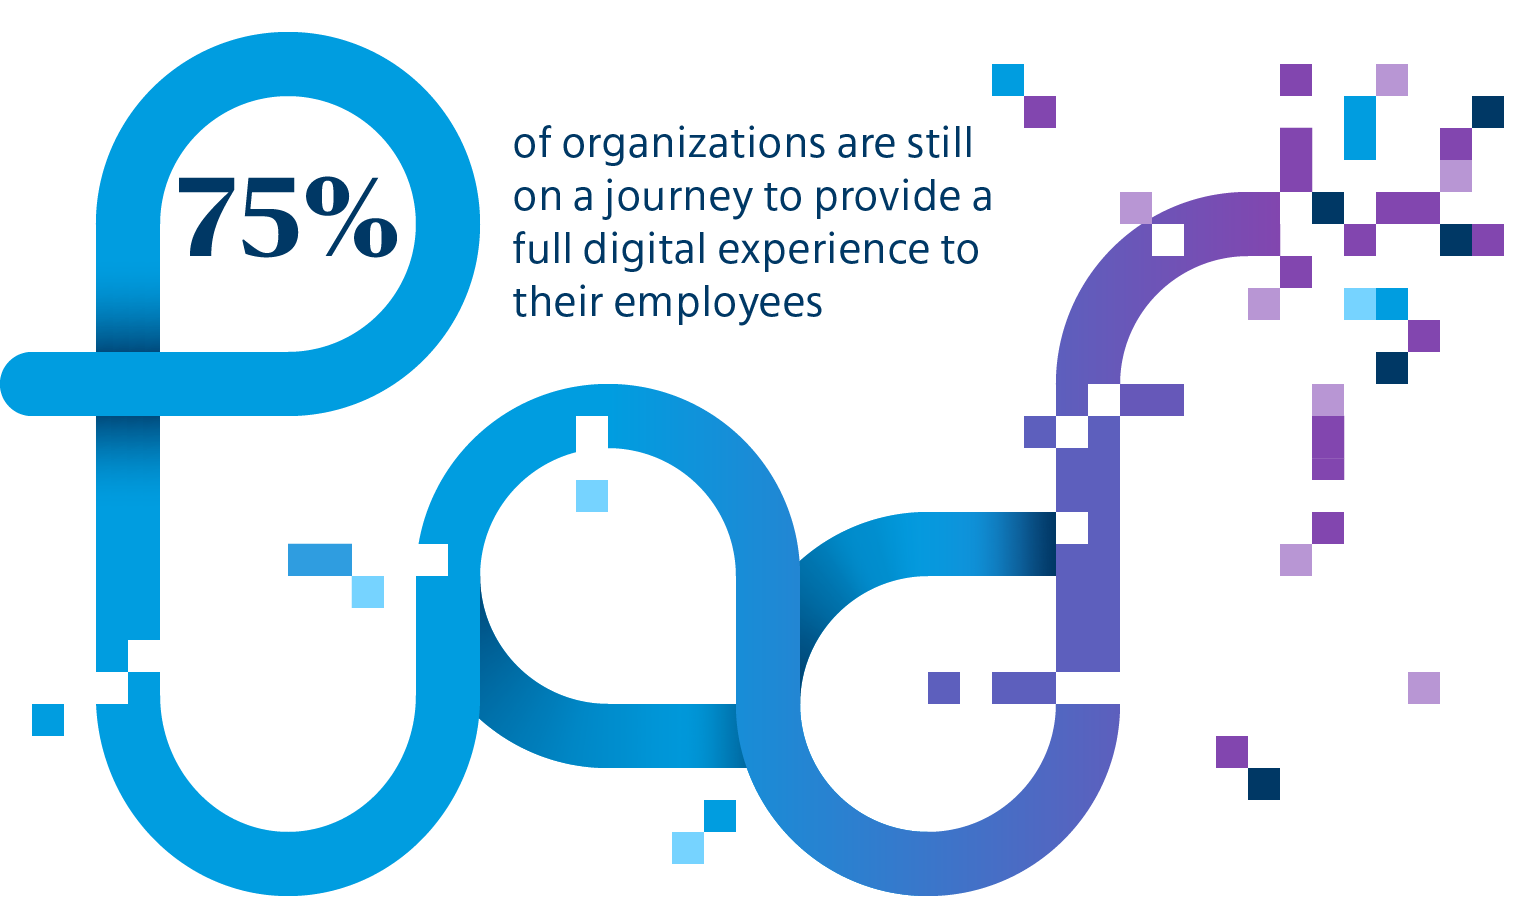 75 percent of organizations are still on a journey to provide a full digital experience to their employees